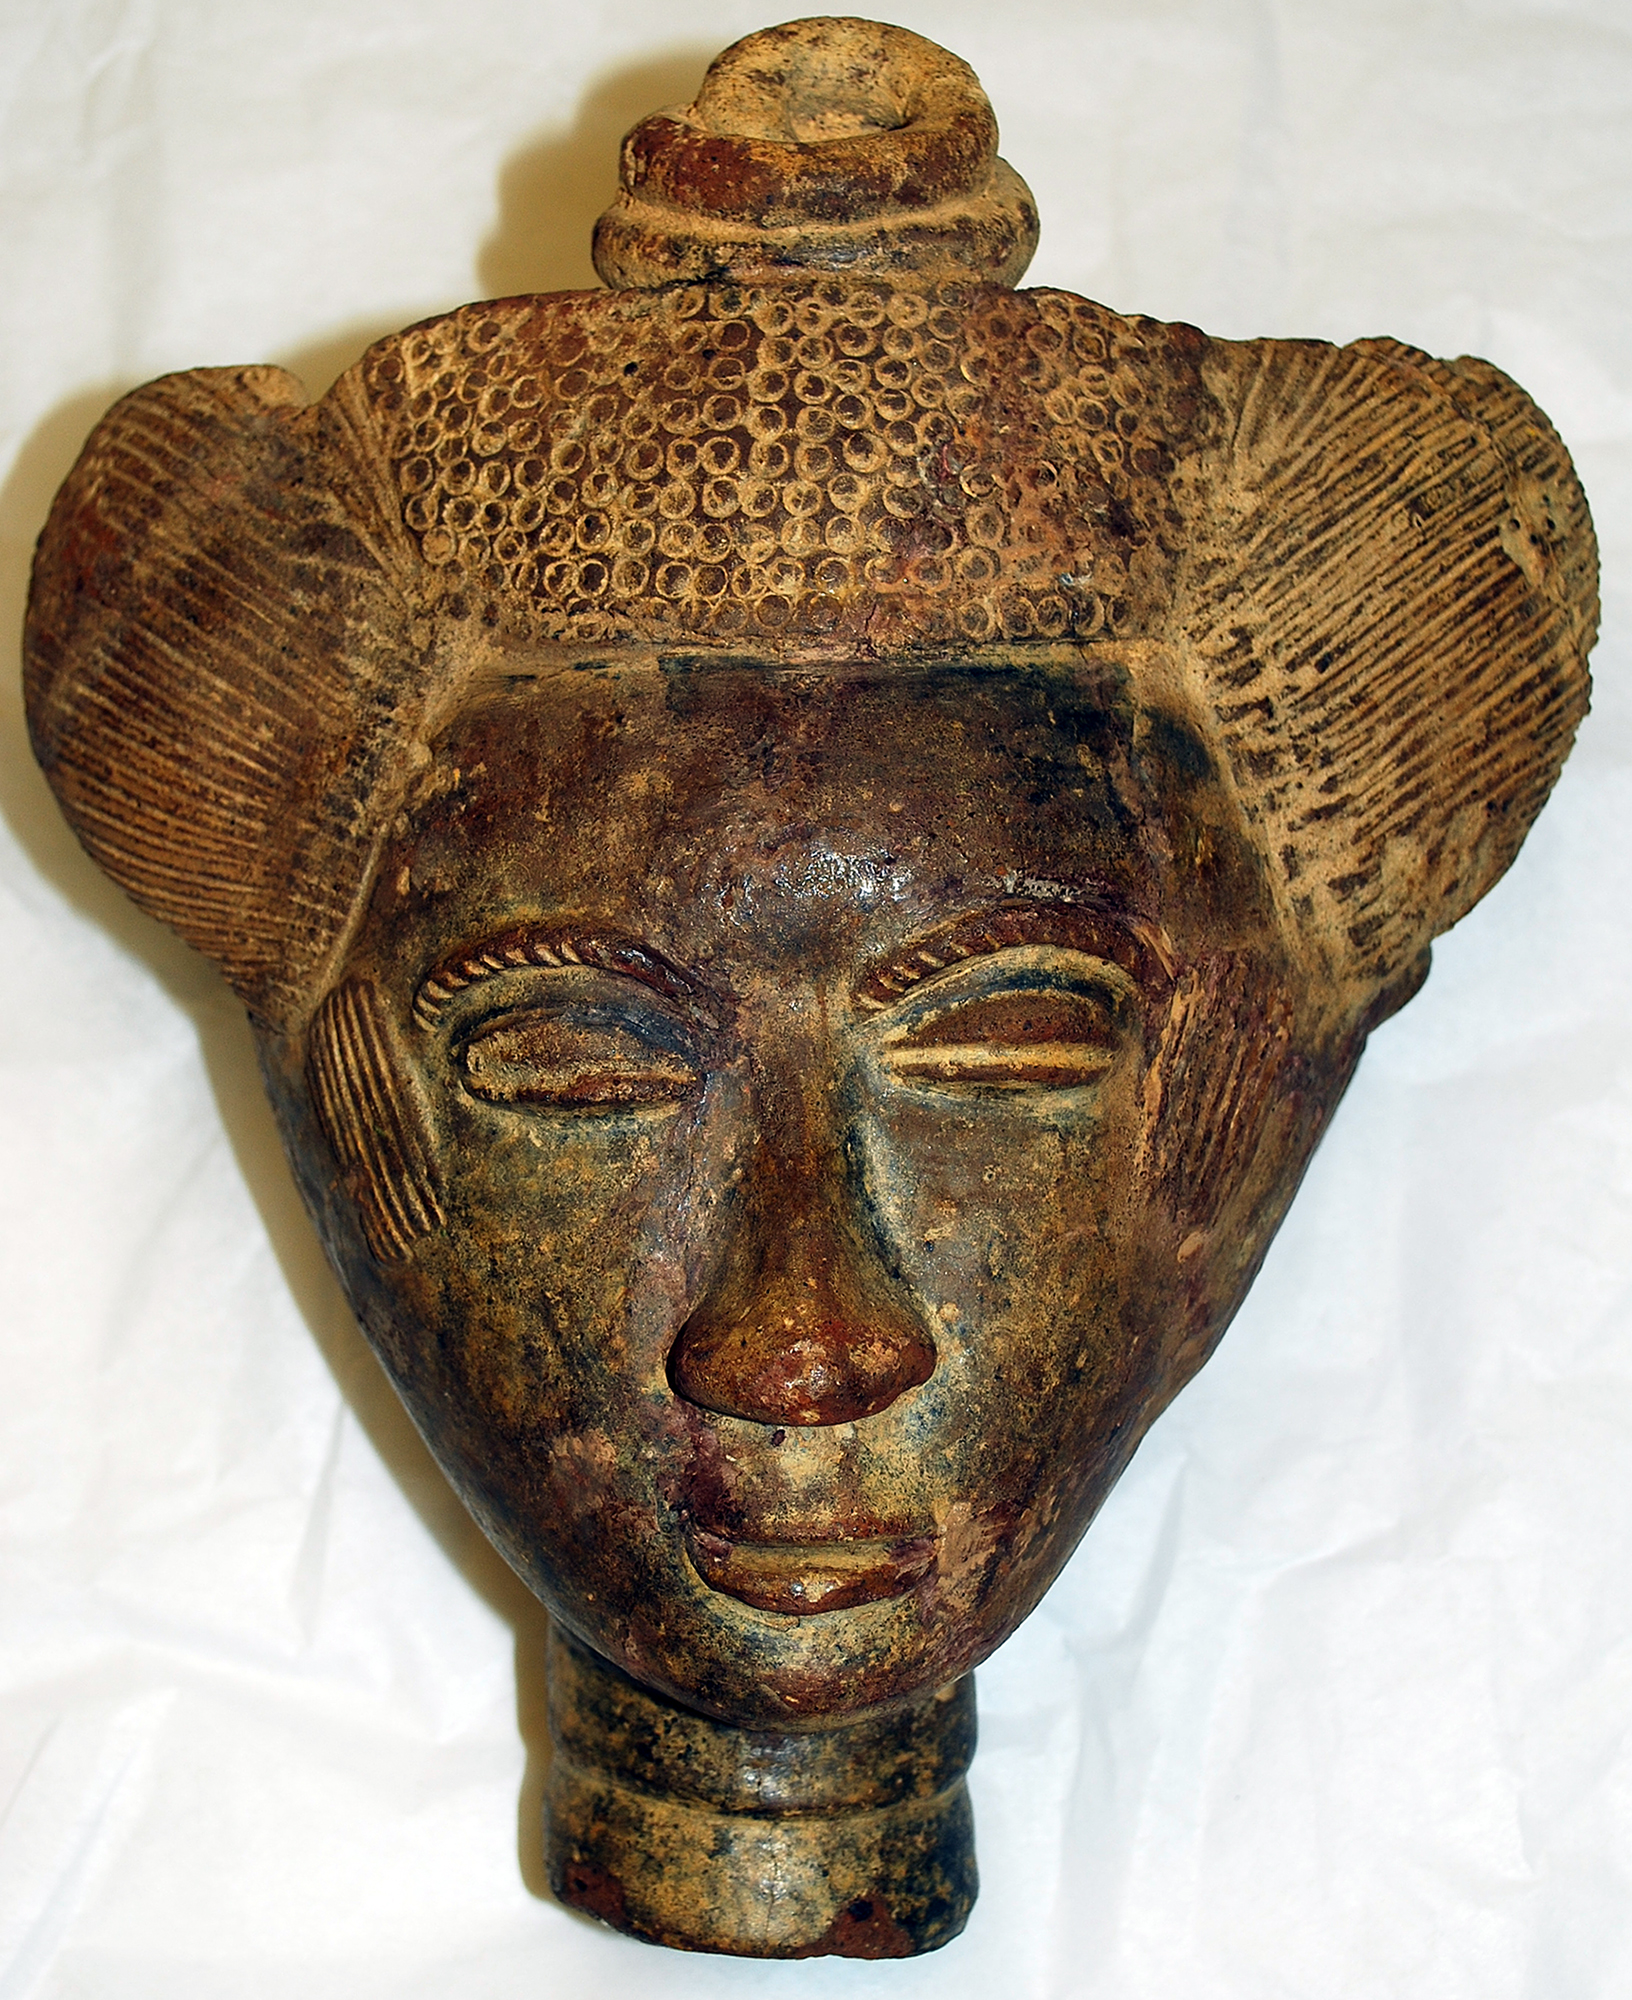 A sculpture of a human head carved from deep brown wood